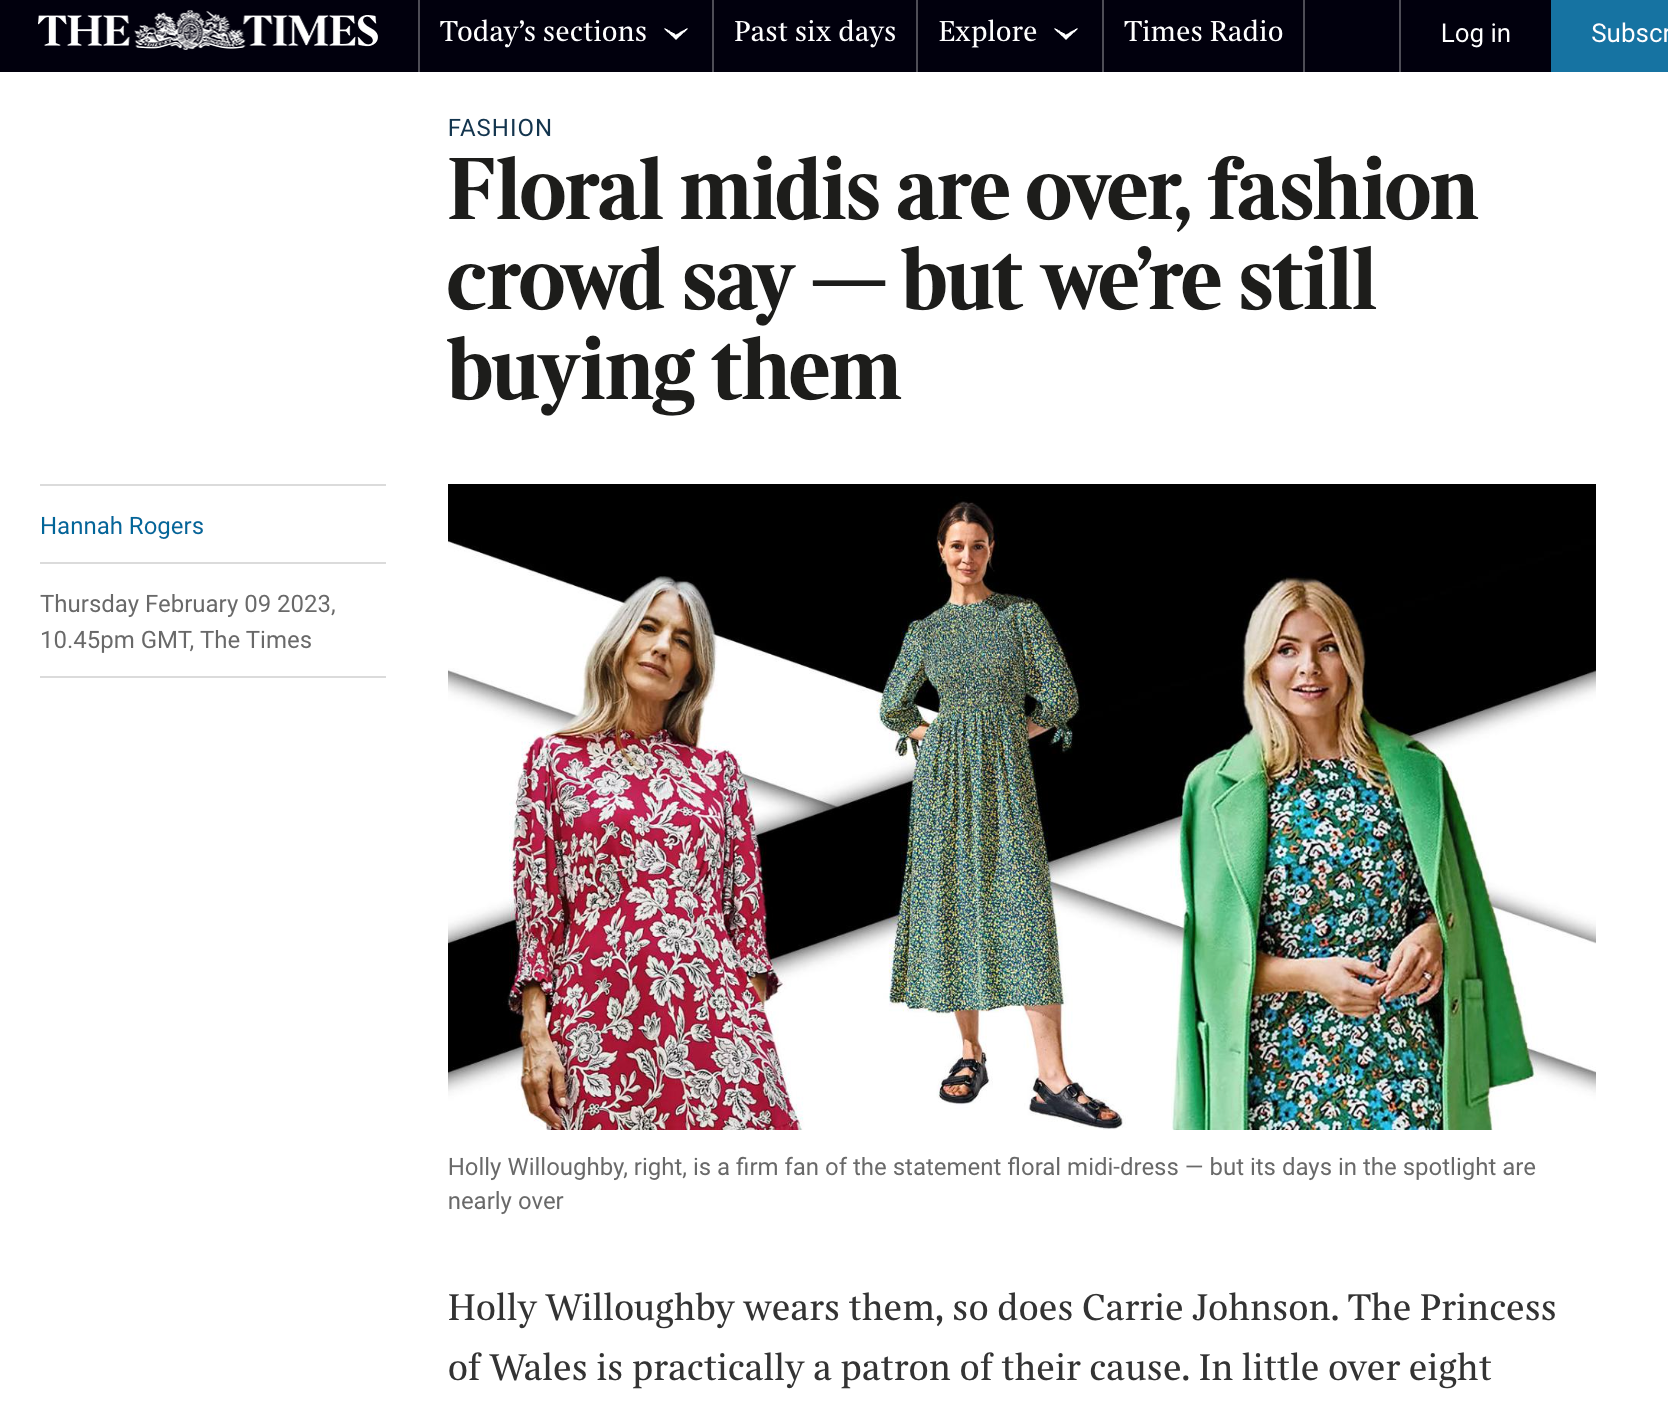 Floral midis are over, fashion crowd say - why buy them?